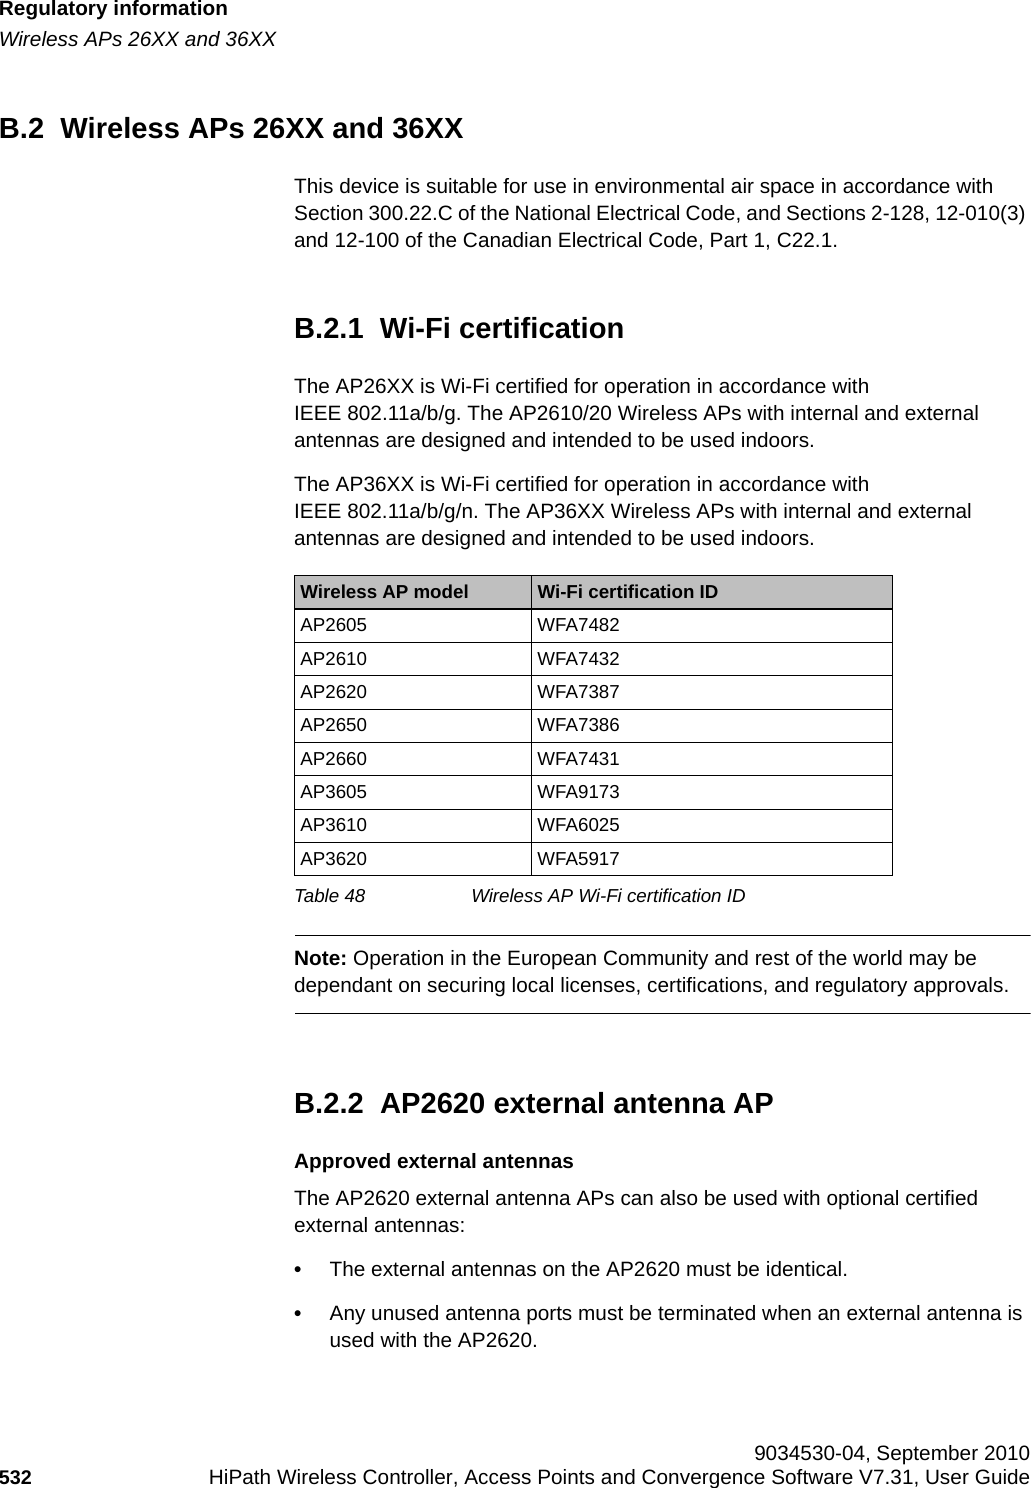 Regulatory informationhwc_appendixb.fmWireless APs 26XX and 36XX 9034530-04, September 2010532 HiPath Wireless Controller, Access Points and Convergence Software V7.31, User Guide        B.2  Wireless APs 26XX and 36XXThis device is suitable for use in environmental air space in accordance with Section 300.22.C of the National Electrical Code, and Sections 2-128, 12-010(3) and 12-100 of the Canadian Electrical Code, Part 1, C22.1.B.2.1  Wi-Fi certificationThe AP26XX is Wi-Fi certified for operation in accordance with IEEE 802.11a/b/g. The AP2610/20 Wireless APs with internal and external antennas are designed and intended to be used indoors.The AP36XX is Wi-Fi certified for operation in accordance with IEEE 802.11a/b/g/n. The AP36XX Wireless APs with internal and external antennas are designed and intended to be used indoors.Note: Operation in the European Community and rest of the world may be dependant on securing local licenses, certifications, and regulatory approvals.B.2.2  AP2620 external antenna APApproved external antennasThe AP2620 external antenna APs can also be used with optional certified external antennas:•The external antennas on the AP2620 must be identical.•Any unused antenna ports must be terminated when an external antenna is used with the AP2620.Wireless AP model Wi-Fi certification IDAP2605 WFA7482AP2610 WFA7432AP2620 WFA7387AP2650 WFA7386AP2660 WFA7431AP3605 WFA9173AP3610 WFA6025AP3620 WFA5917Table 48 Wireless AP Wi-Fi certification ID